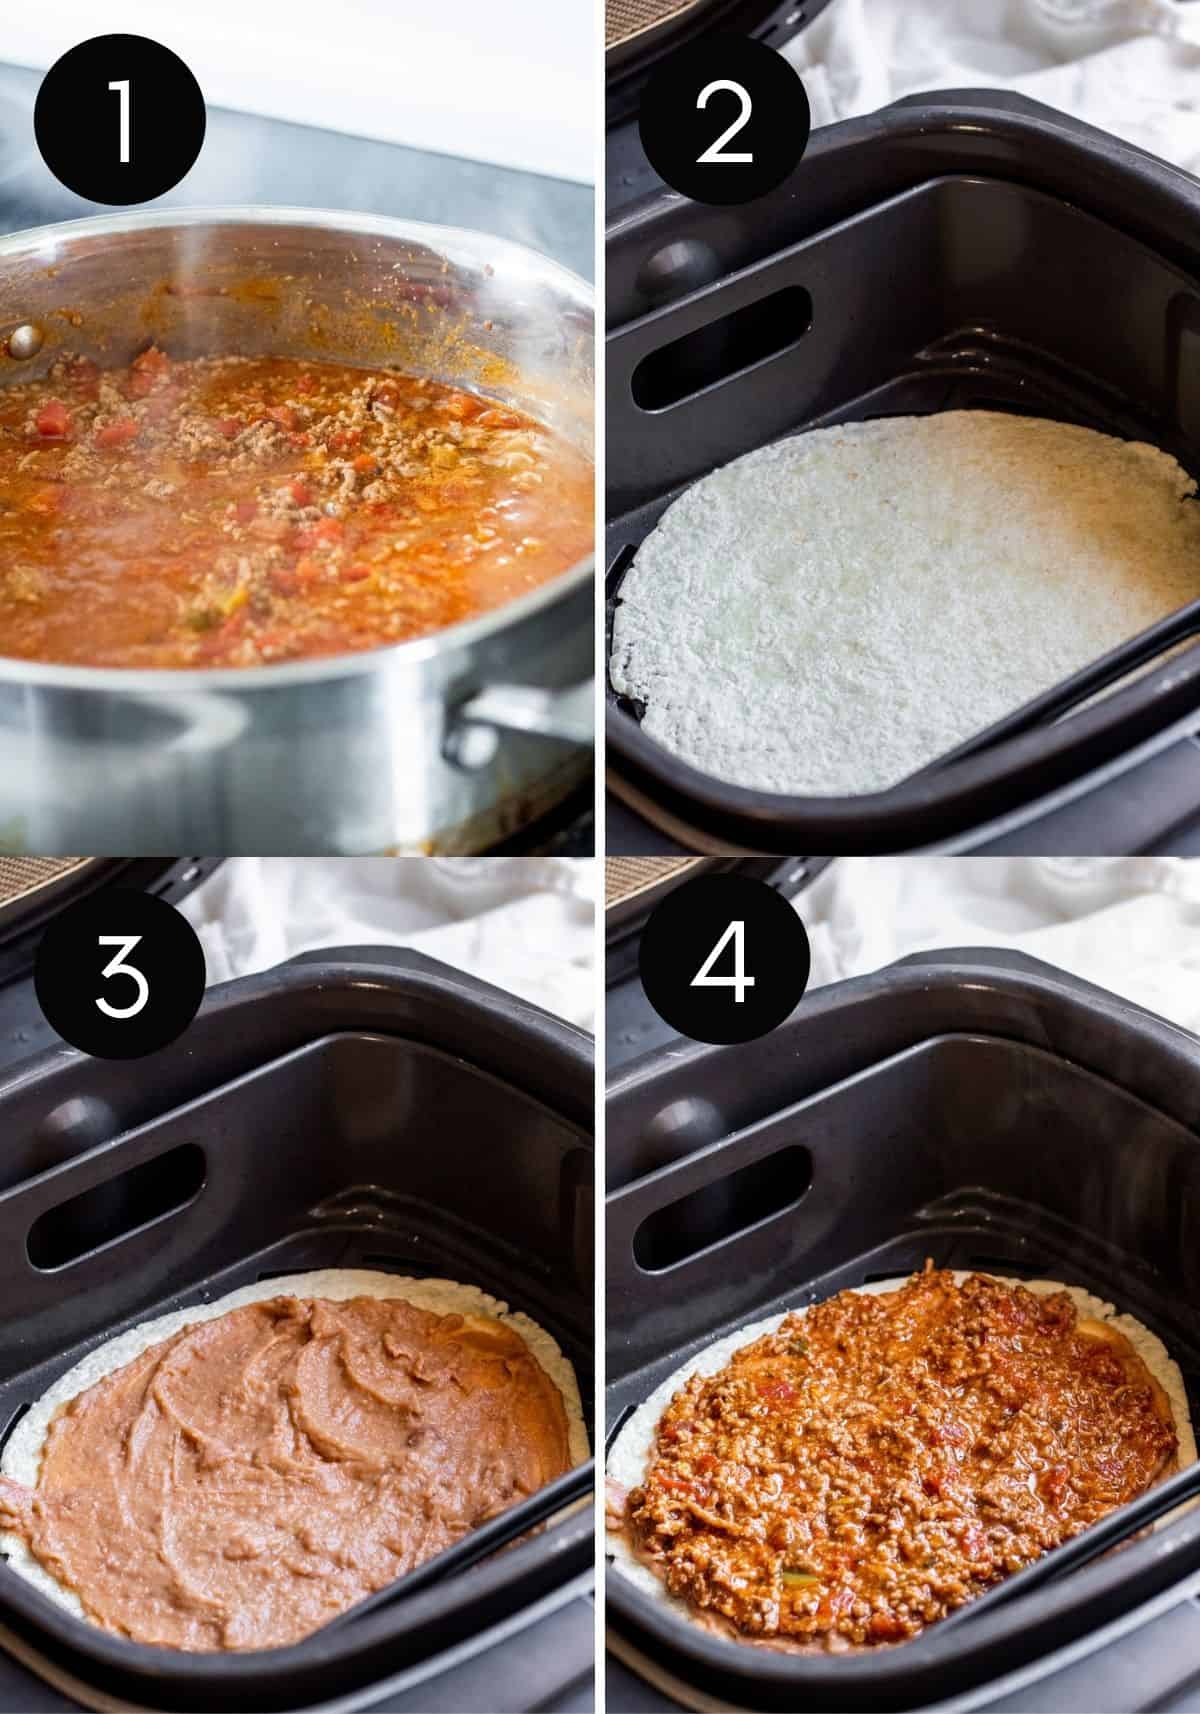 Steps 1-4 prep collage showing pizzas being made in air fryer.